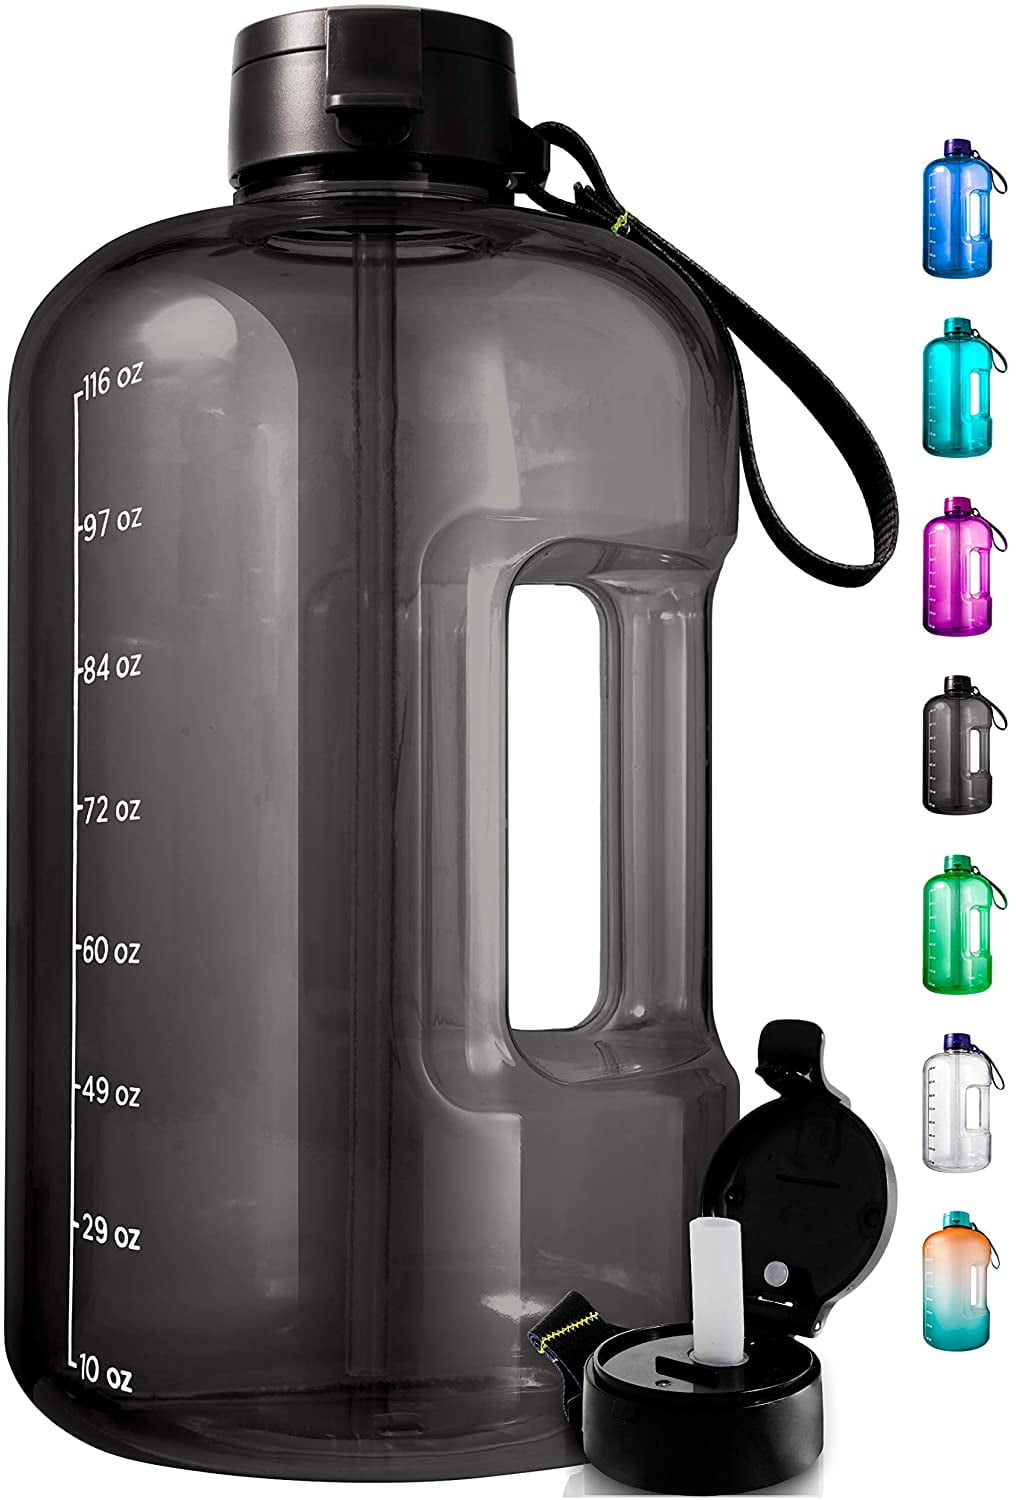 BPA Free Water Bottles with Times to Drink HydMotor 64oz/Half Gallon Water Bottle with Straw Ensure You Drink Enough Water for Daily Life. 